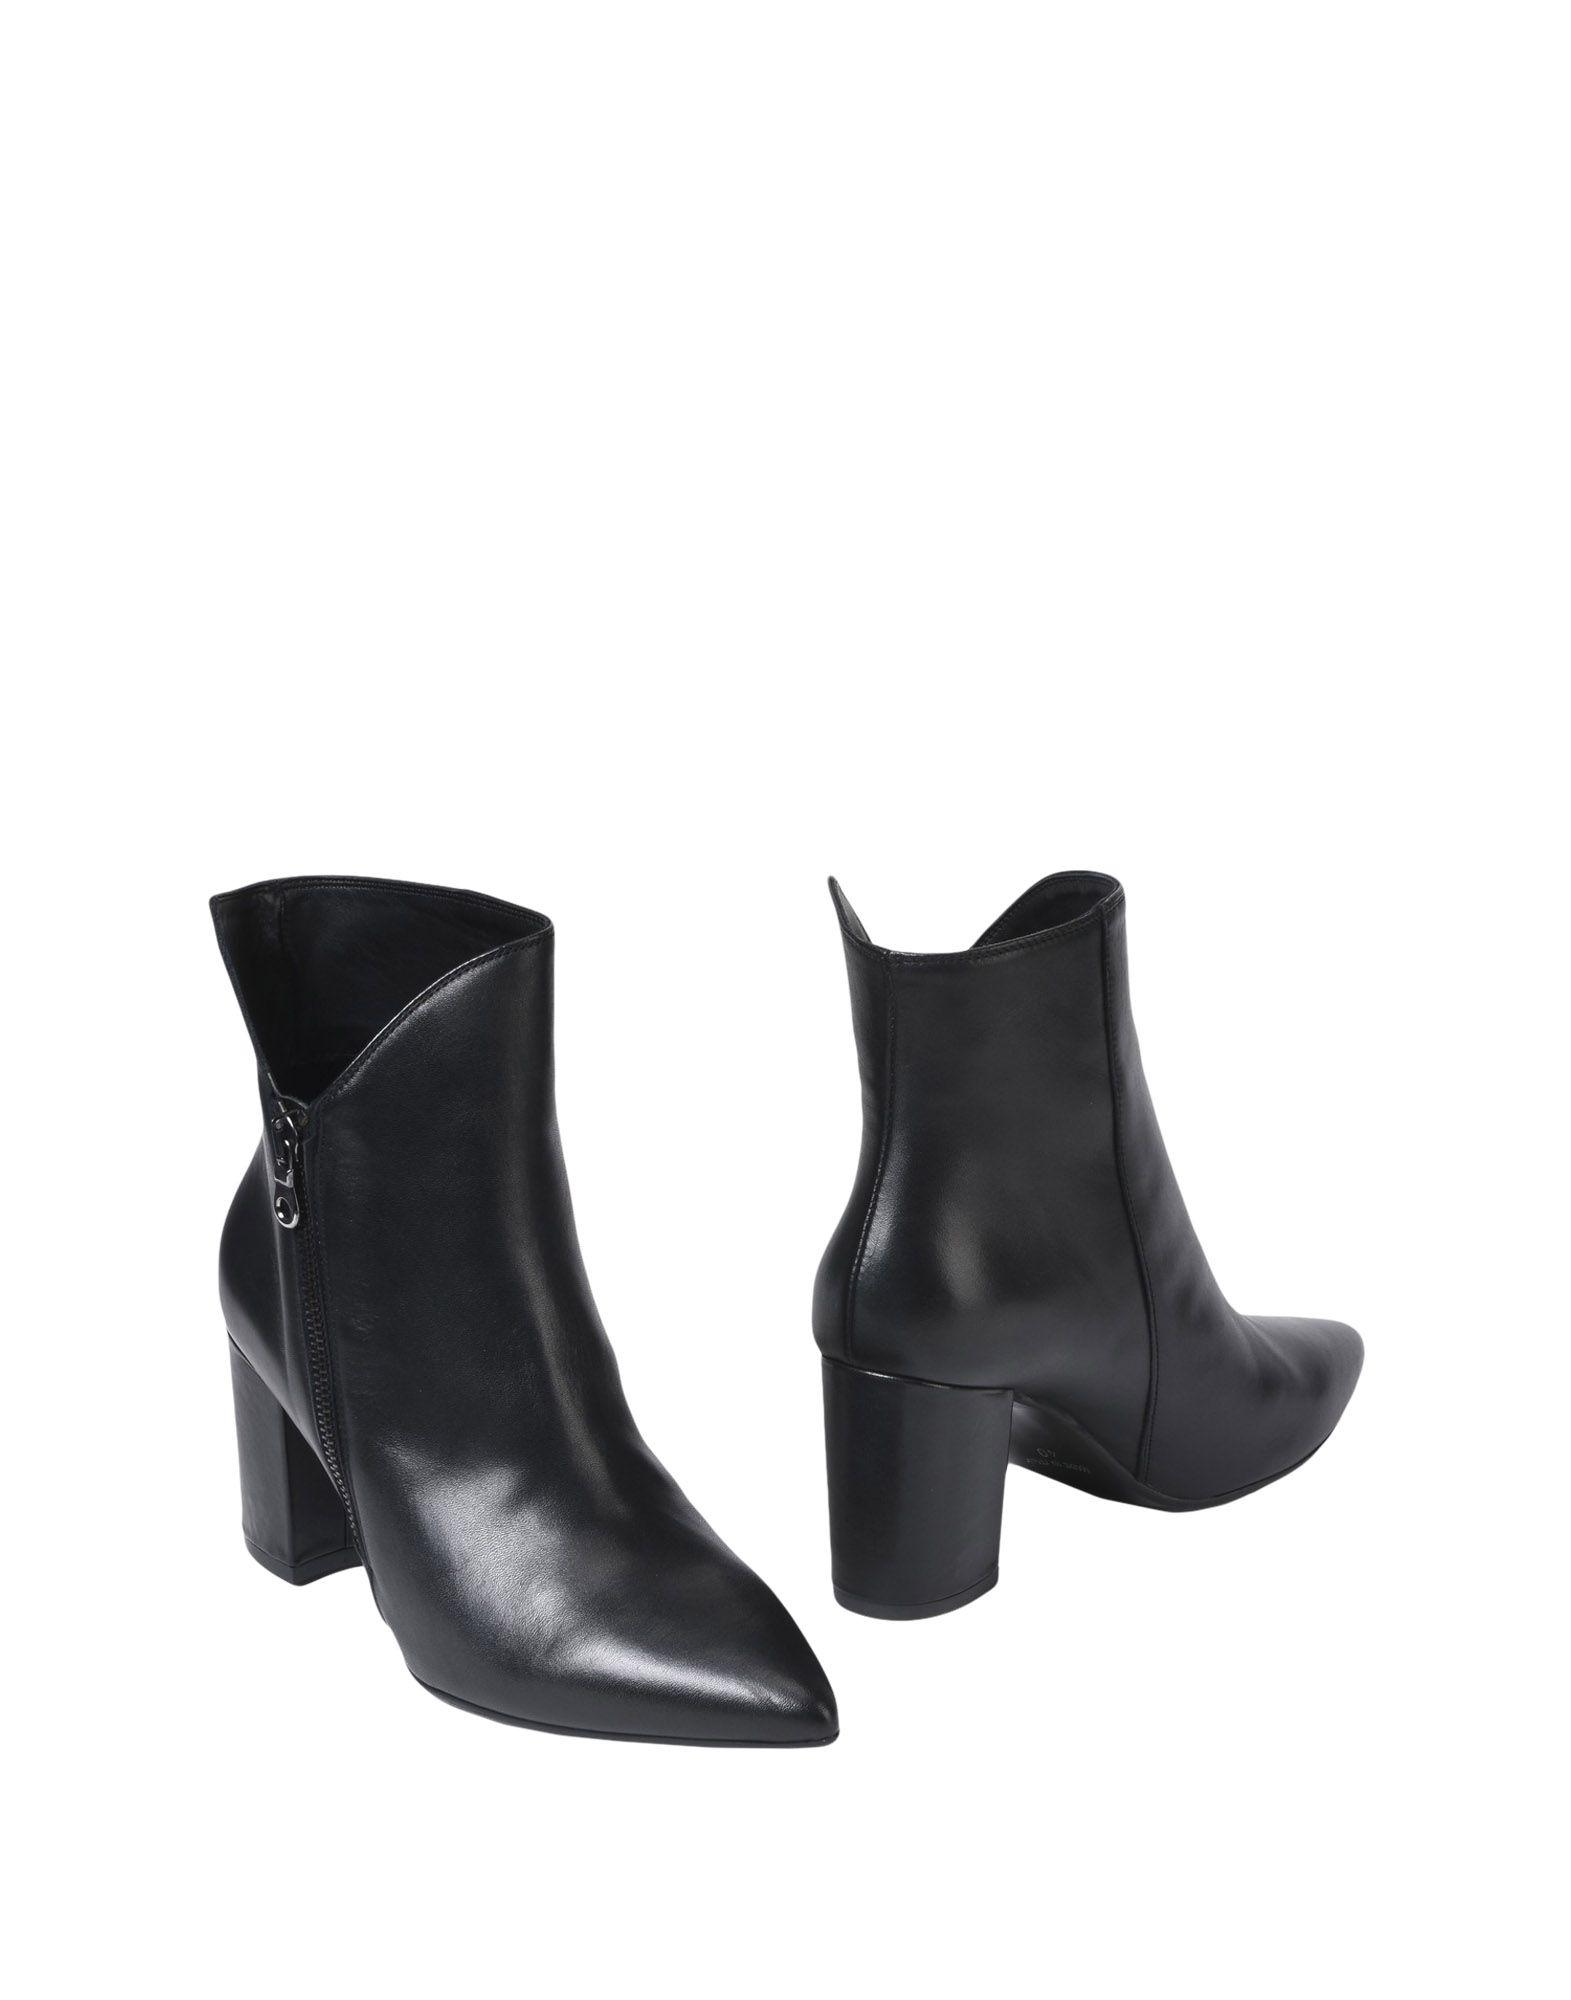 Accademia Ankle Boots in Black - Lyst